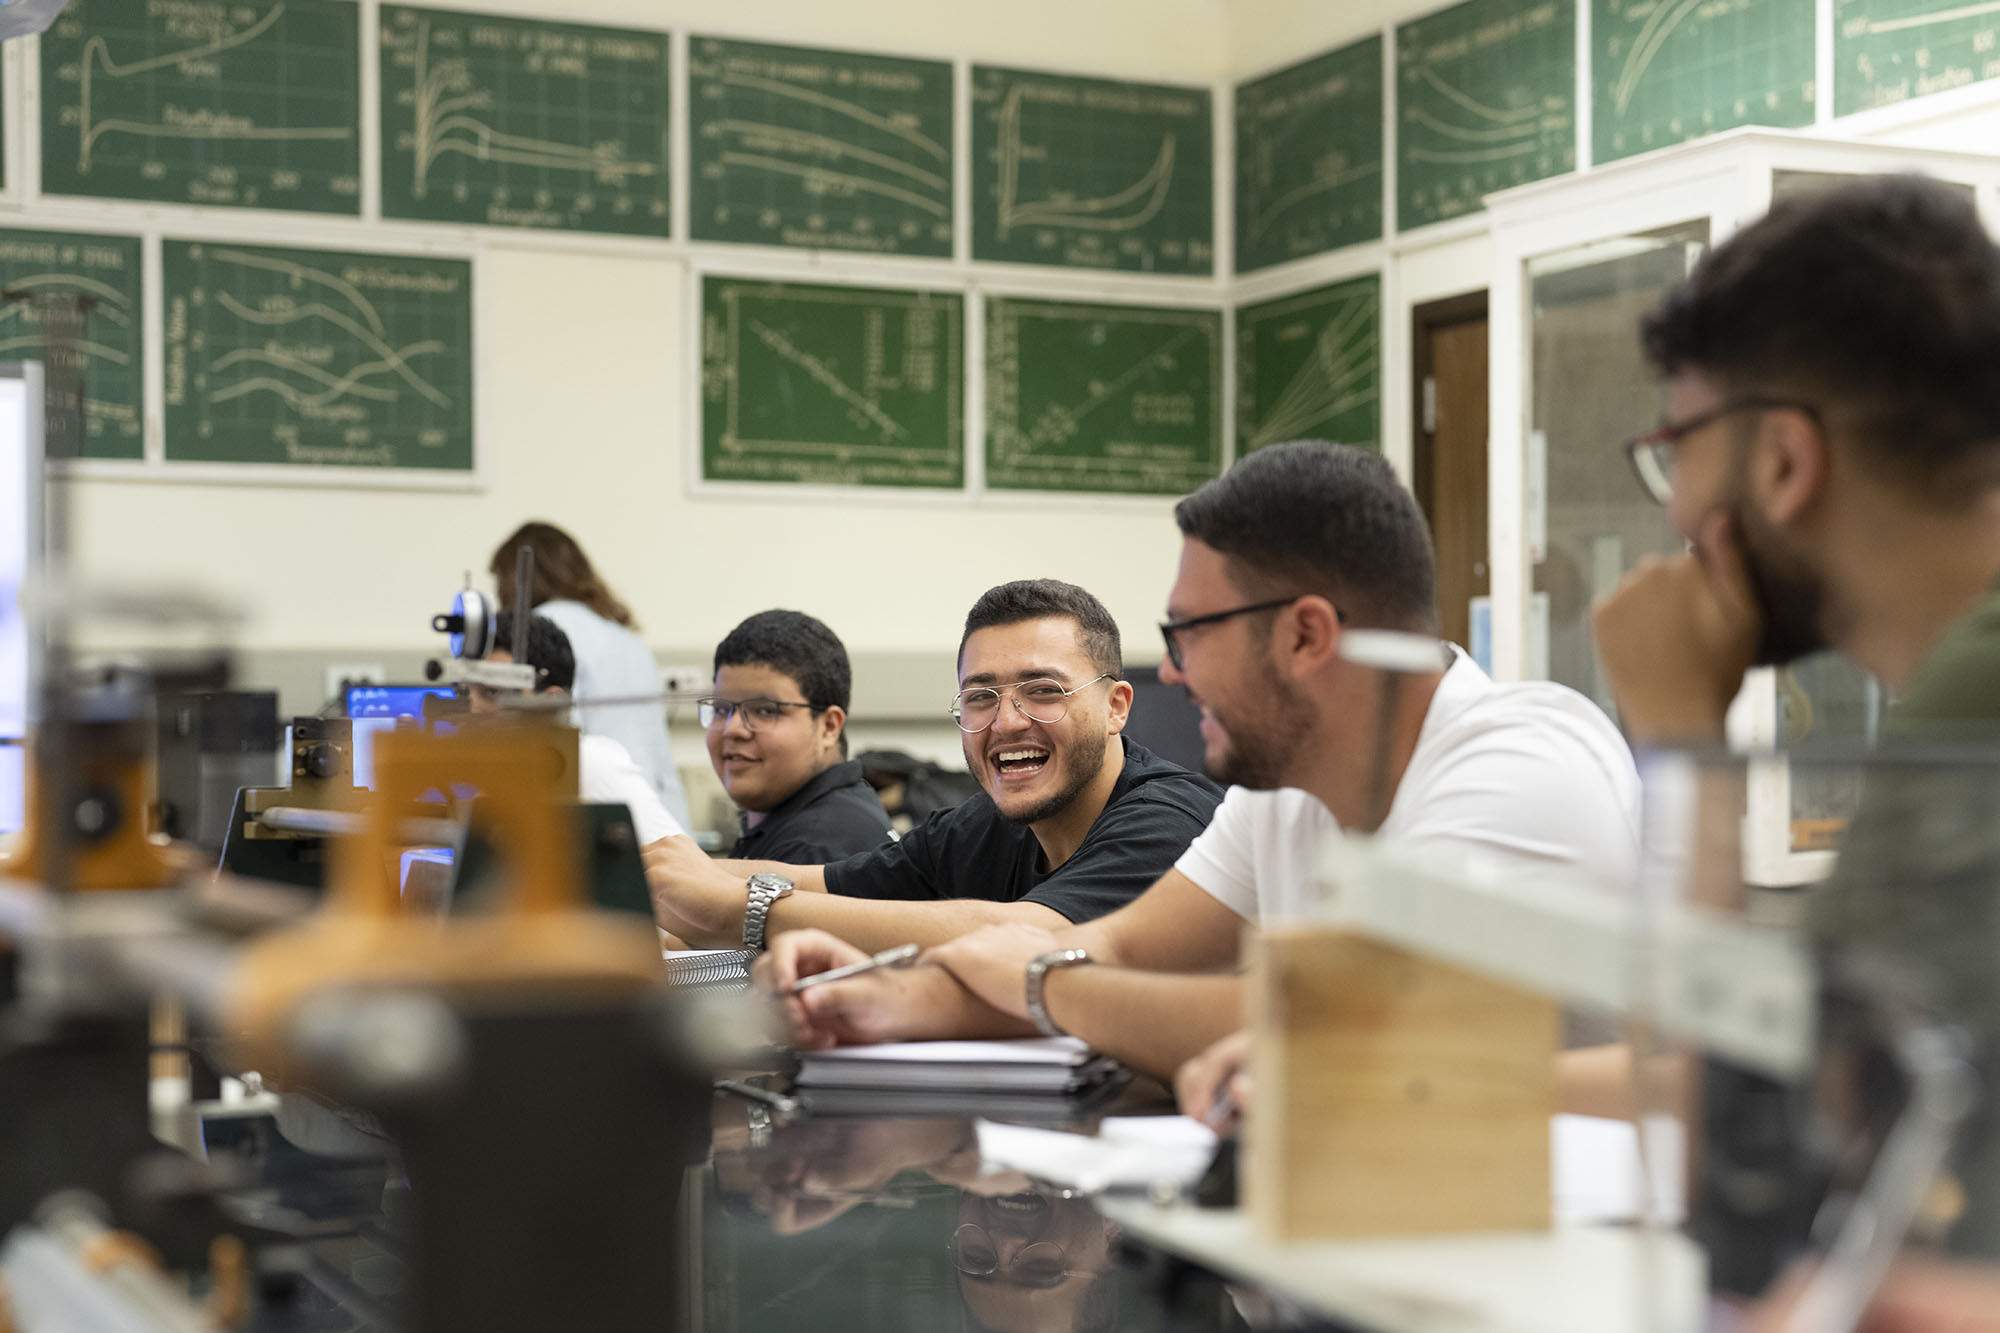 mechanical engineering graduate program image of smiling group of male students talking about a topic in class lab